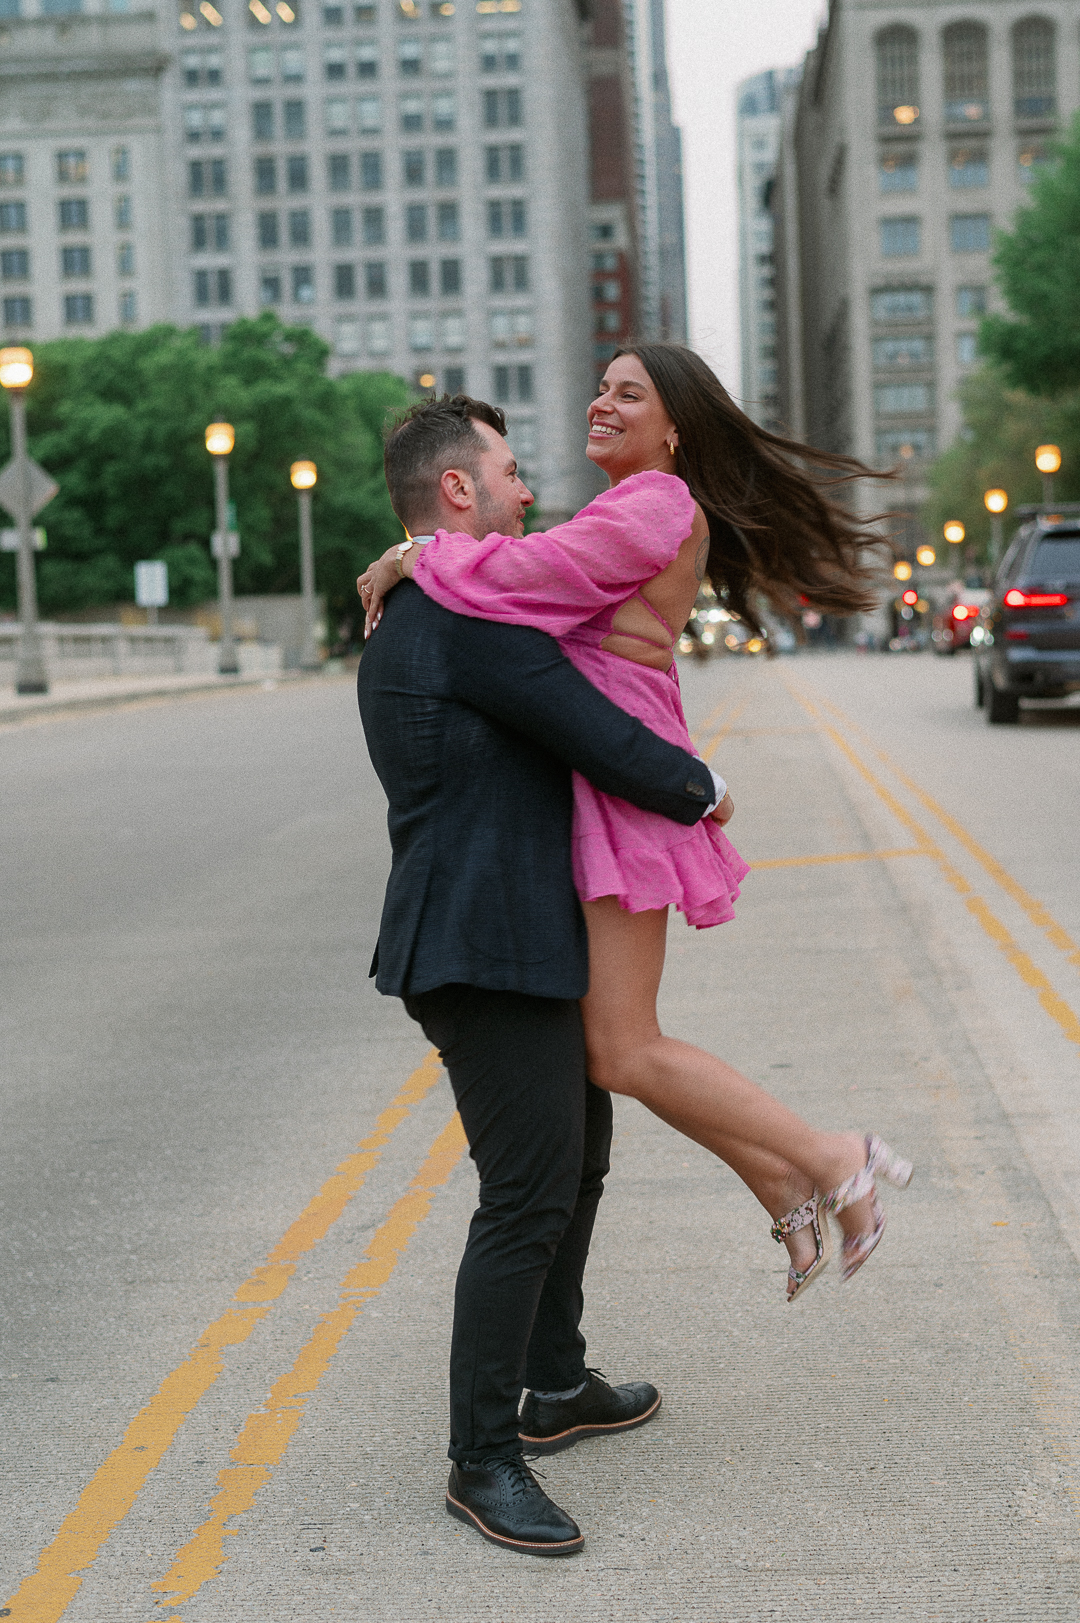 Couple dancing on michigan avenue at the art institute of chicago for their engagement photos